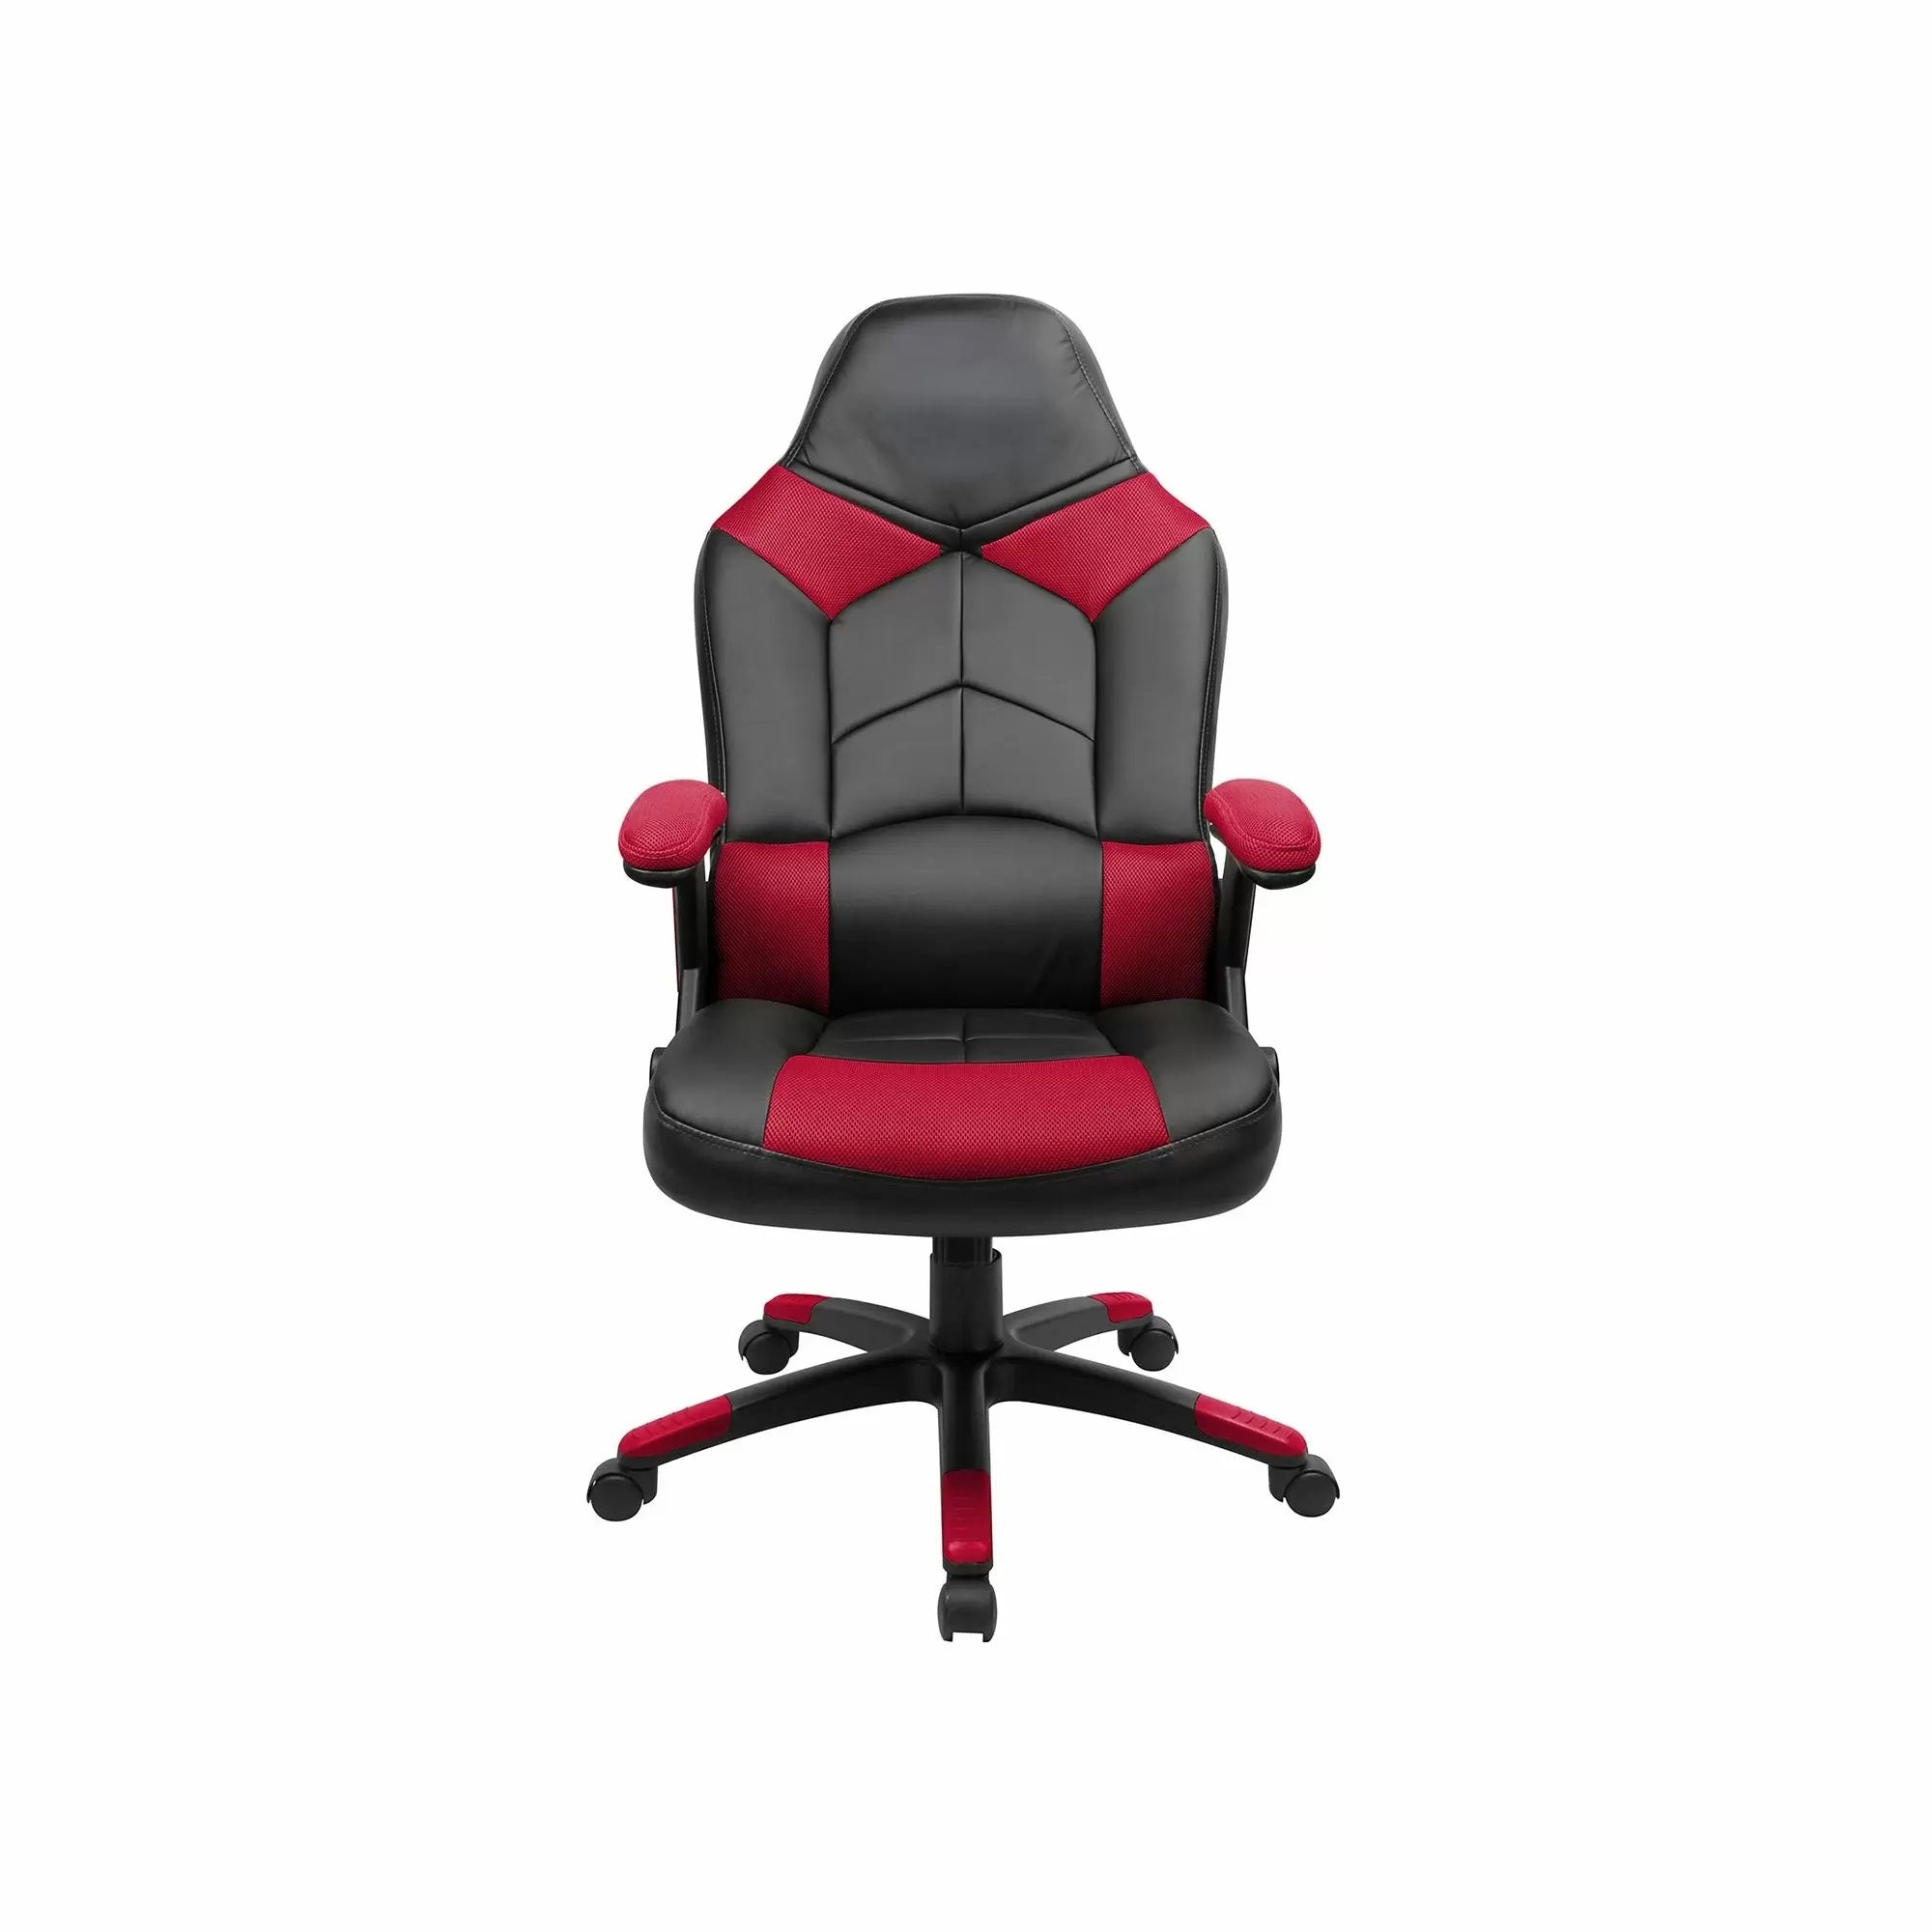 Imperial USA Oversized Video Gaming Chair Black Red